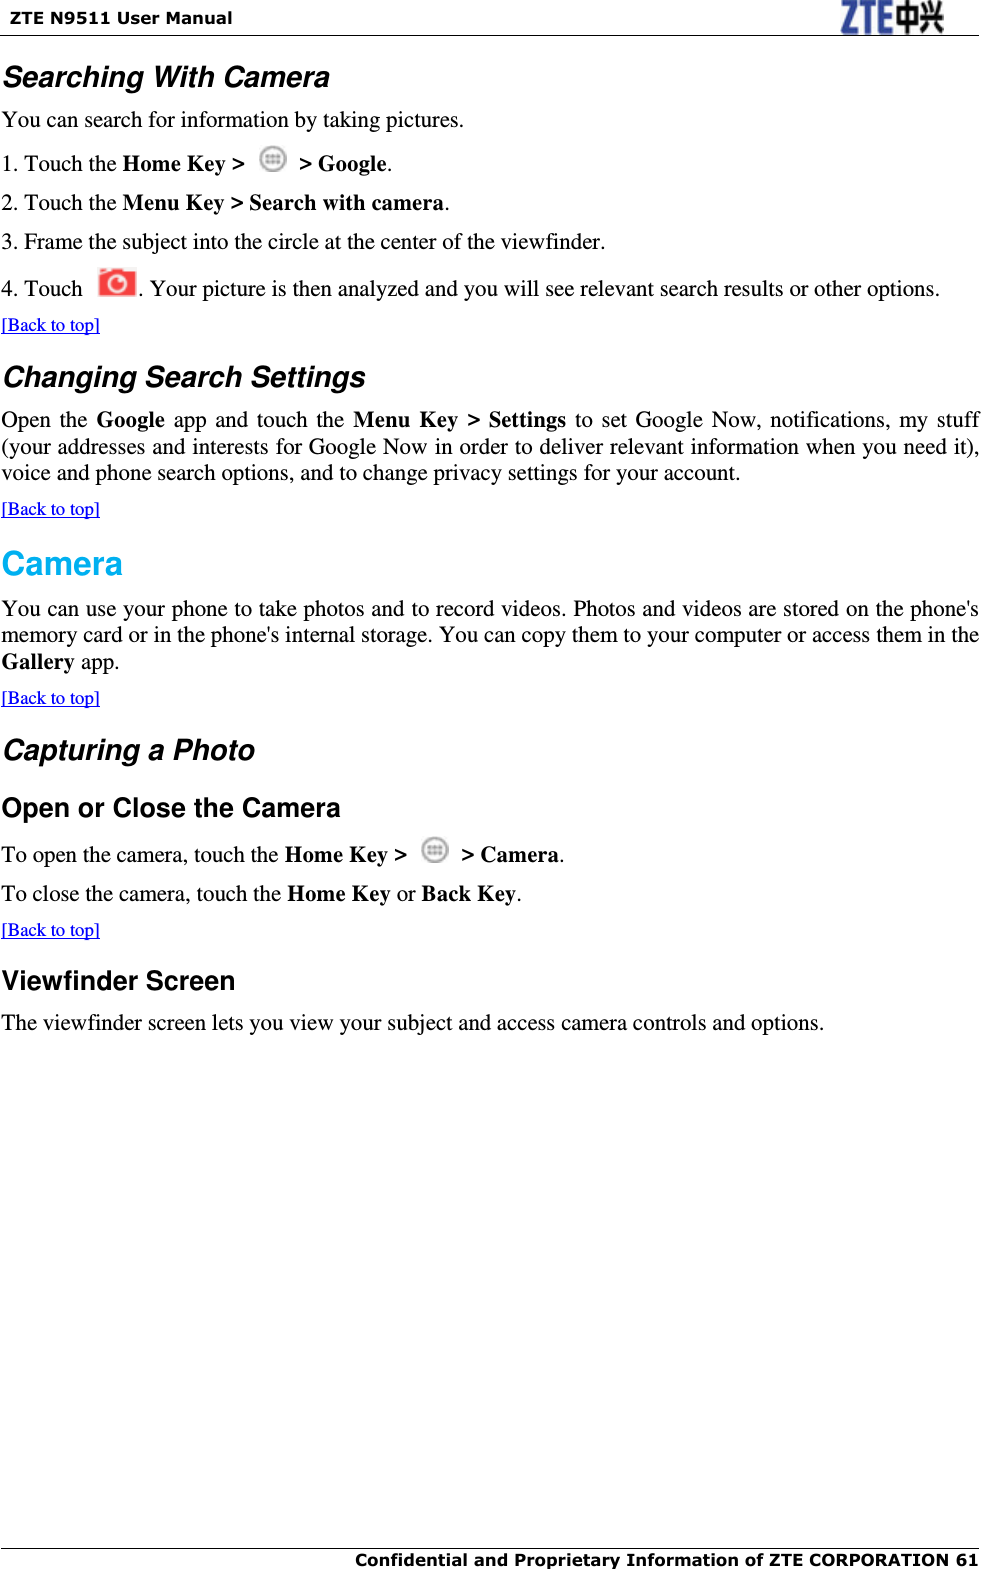   ZTE N9511 User Manual    Confidential and Proprietary Information of ZTE CORPORATION 61 Searching With Camera You can search for information by taking pictures. 1. Touch the Home Key &gt;    &gt; Google. 2. Touch the Menu Key &gt; Search with camera. 3. Frame the subject into the circle at the center of the viewfinder. 4. Touch  . Your picture is then analyzed and you will see relevant search results or other options. [Back to top] Changing Search Settings Open the Google app and touch the Menu Key  &gt; Settings to set Google Now, notifications, my stuff (your addresses and interests for Google Now in order to deliver relevant information when you need it), voice and phone search options, and to change privacy settings for your account. [Back to top] Camera You can use your phone to take photos and to record videos. Photos and videos are stored on the phone&apos;s memory card or in the phone&apos;s internal storage. You can copy them to your computer or access them in the Gallery app. [Back to top] Capturing a Photo Open or Close the Camera To open the camera, touch the Home Key &gt;    &gt; Camera. To close the camera, touch the Home Key or Back Key. [Back to top] Viewfinder Screen The viewfinder screen lets you view your subject and access camera controls and options. 